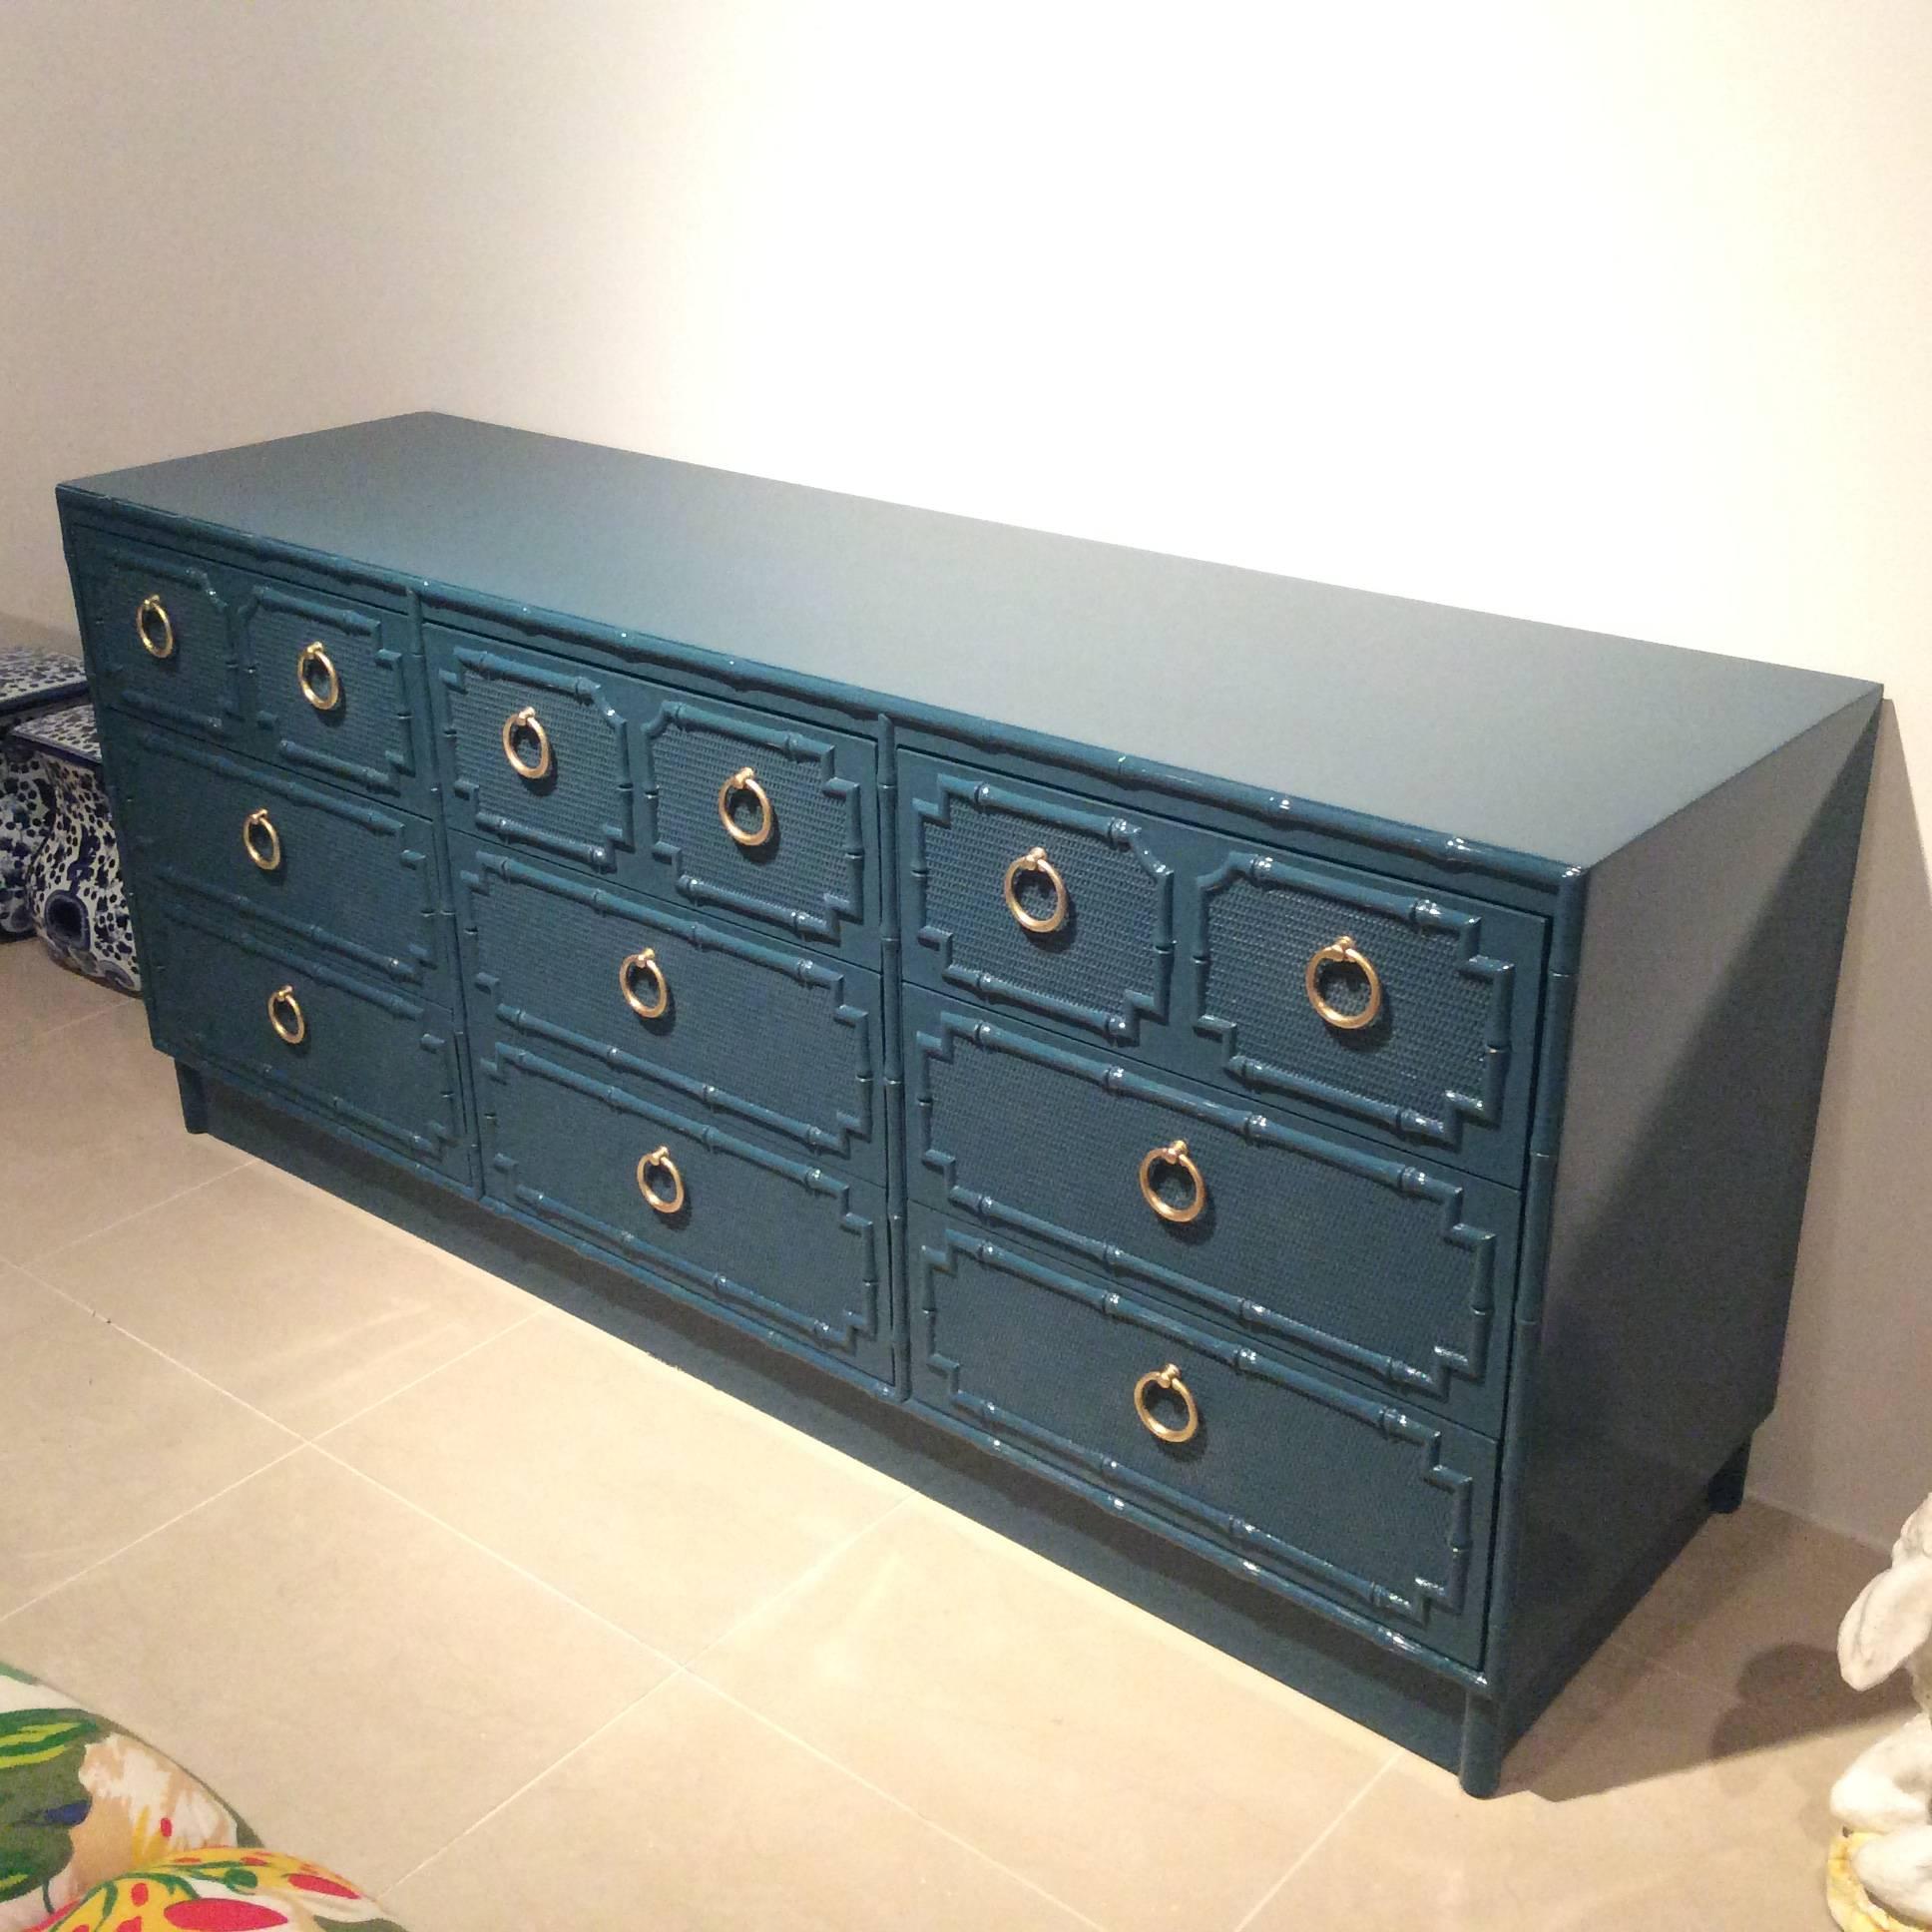 Amazing vintage faux bamboo nine-drawer dresser newly lacquered in a teal peacock blue with lovely polished brass ring hardware.
Matching nightstands available.
Hollywood Regency, Chinese Chippendale, chinoiserie, Palm beach, dresser, credenza,